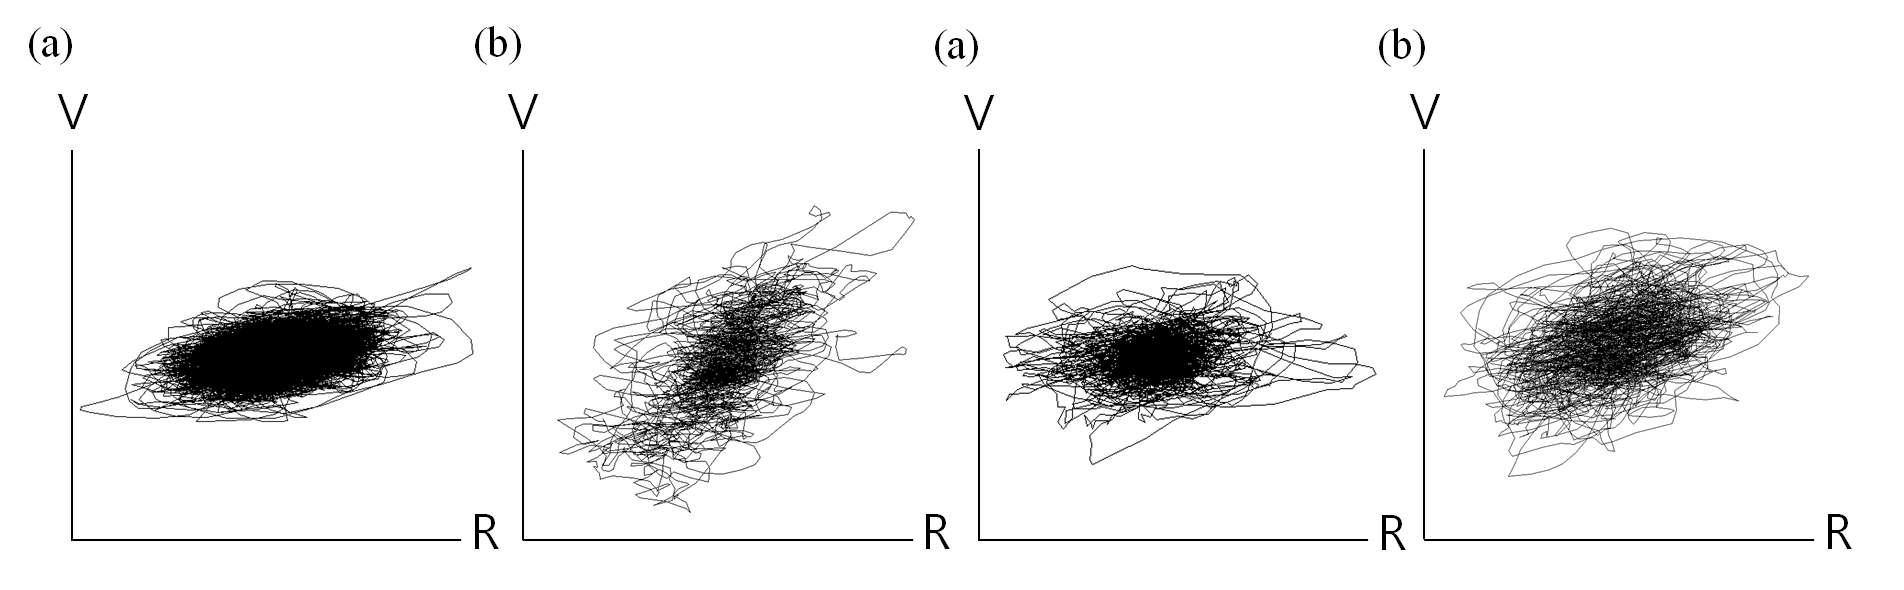 Particle motions of the 50 s long (a) volcanic tremor, (b) VLP event, (c) LP events, and (d) background noise recorded at station WIZ. The vertical (V) and horizontal (R) axes are the relative amplitudes of ground motions to the upward and southeast directions, respectively.